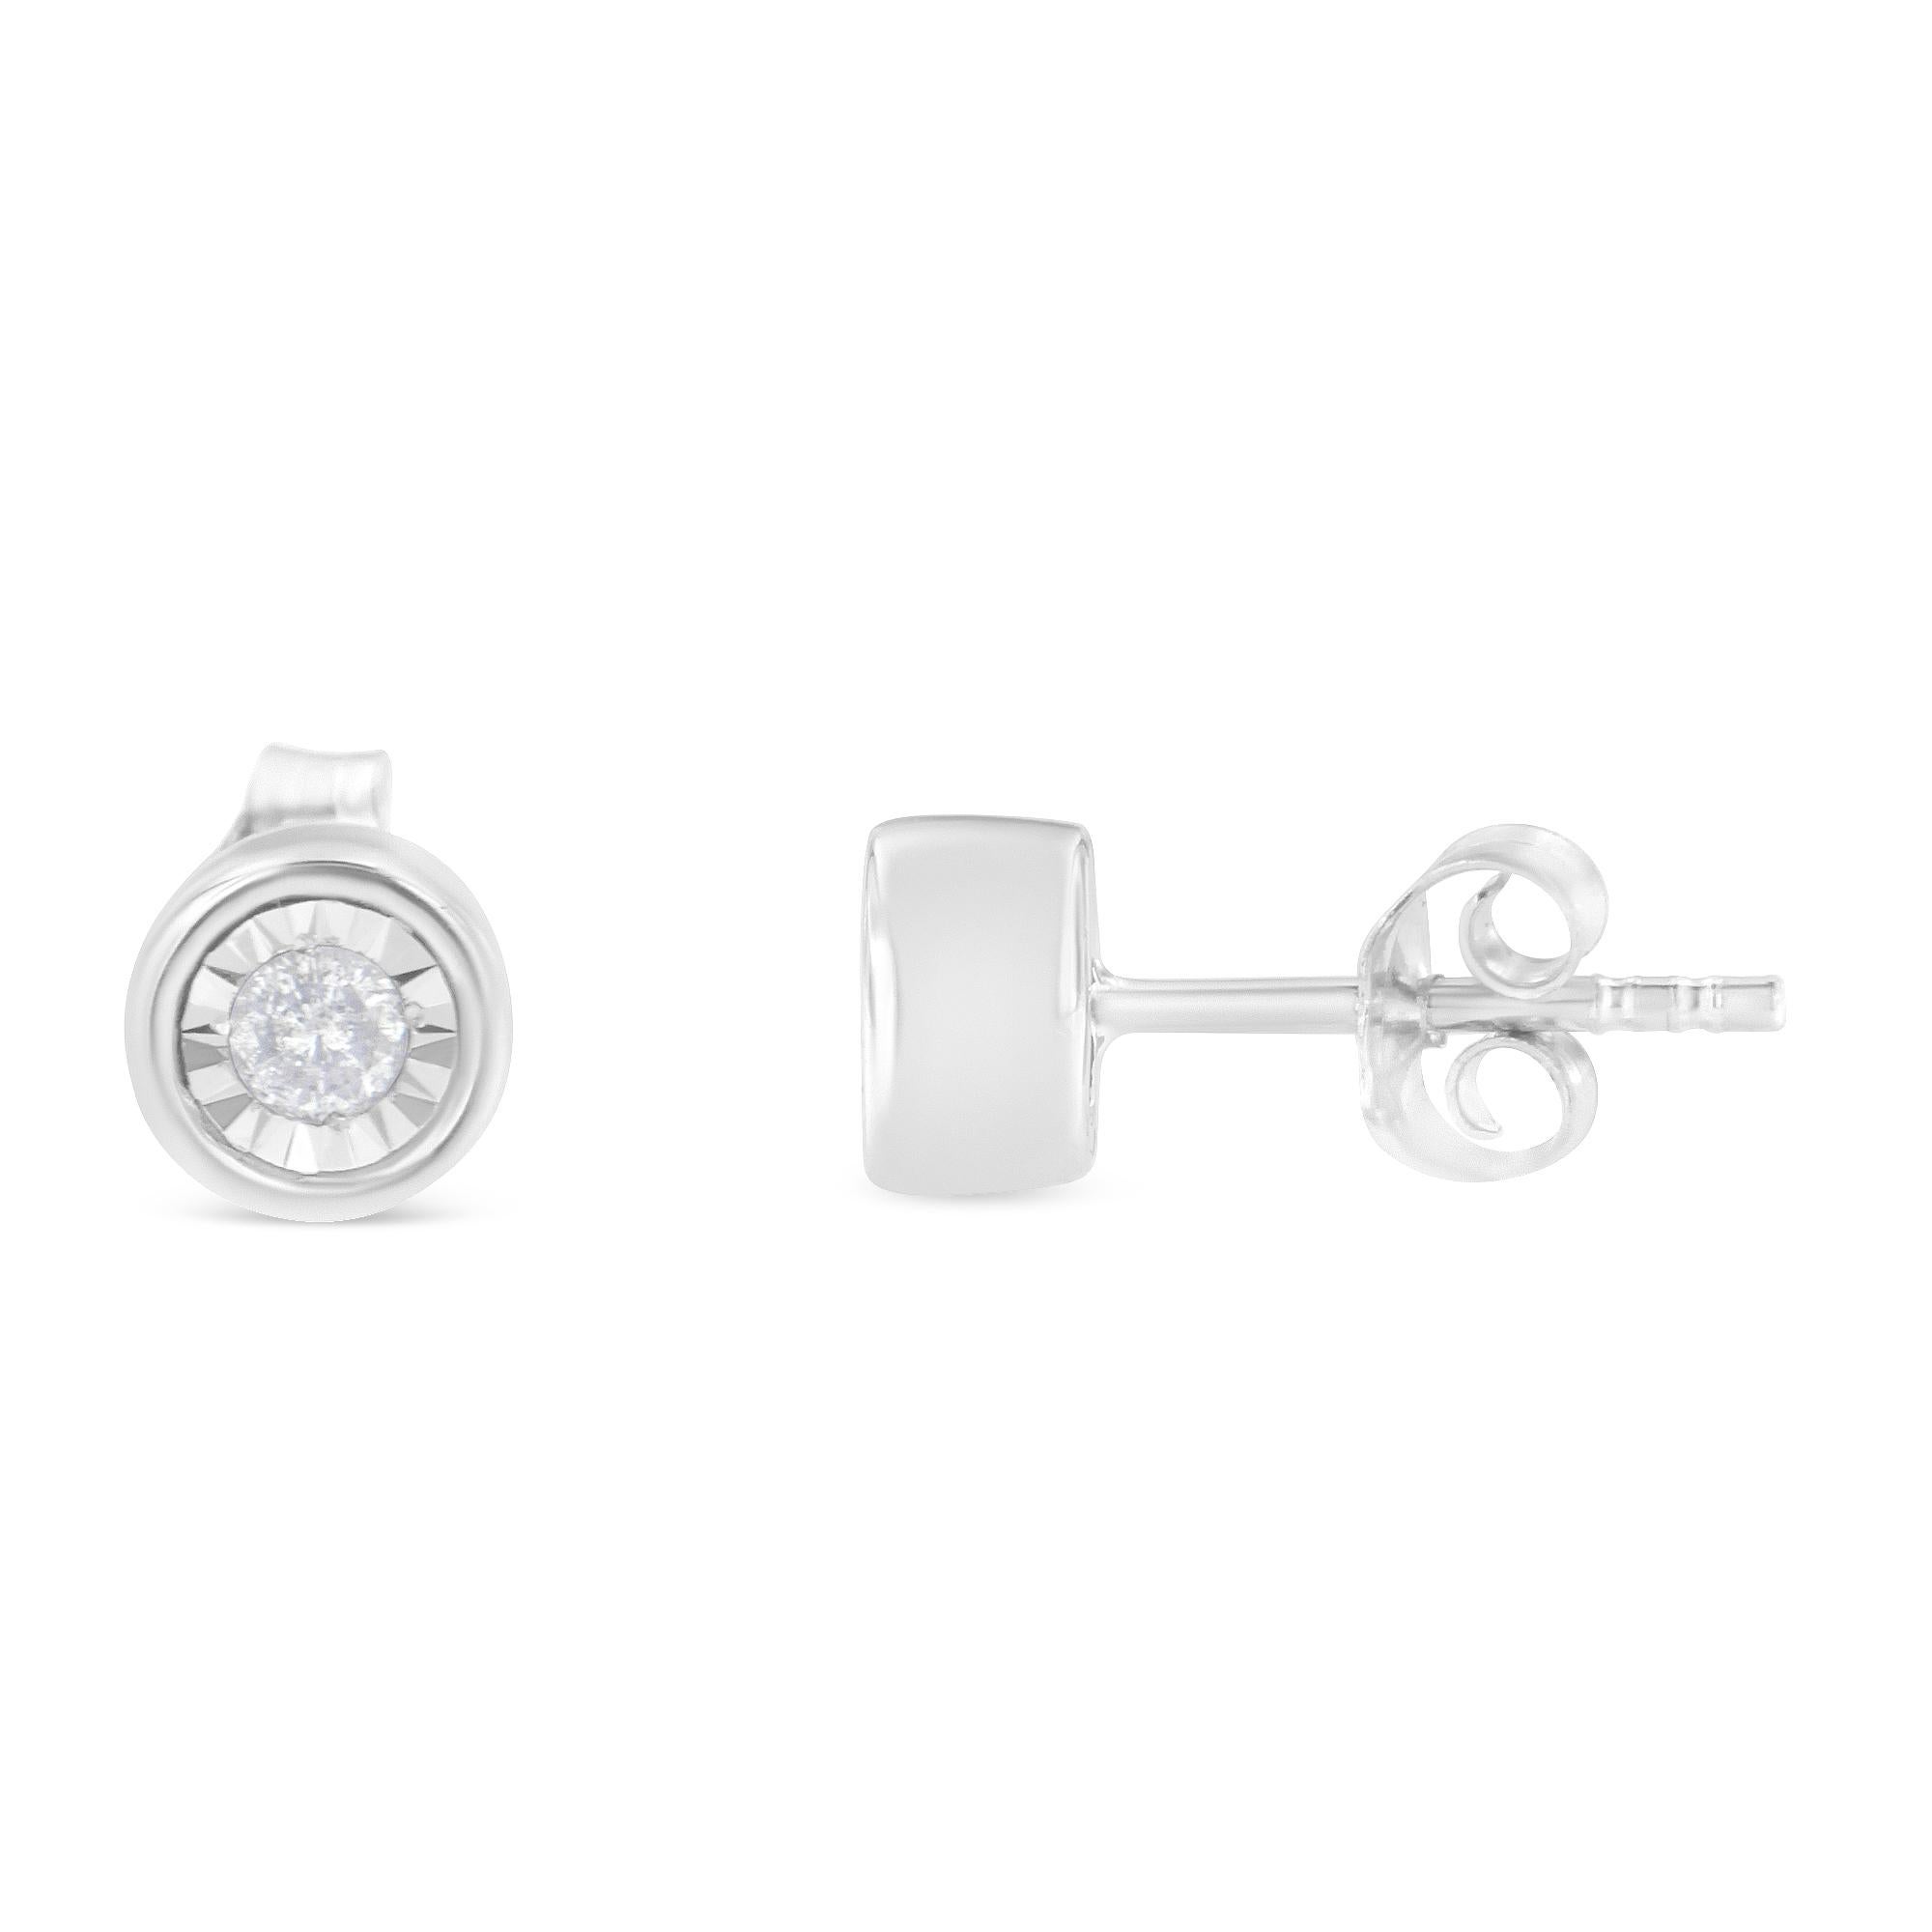 Frame her face with the bold and impressive look of these fabulous diamond bezel stud earrings. Crafted in fabulous sterling silver, each earring features a mesmerizing round-cut 0.1ct. diamond in bezel miracle setting. Captivating with 0.2ct TDW of